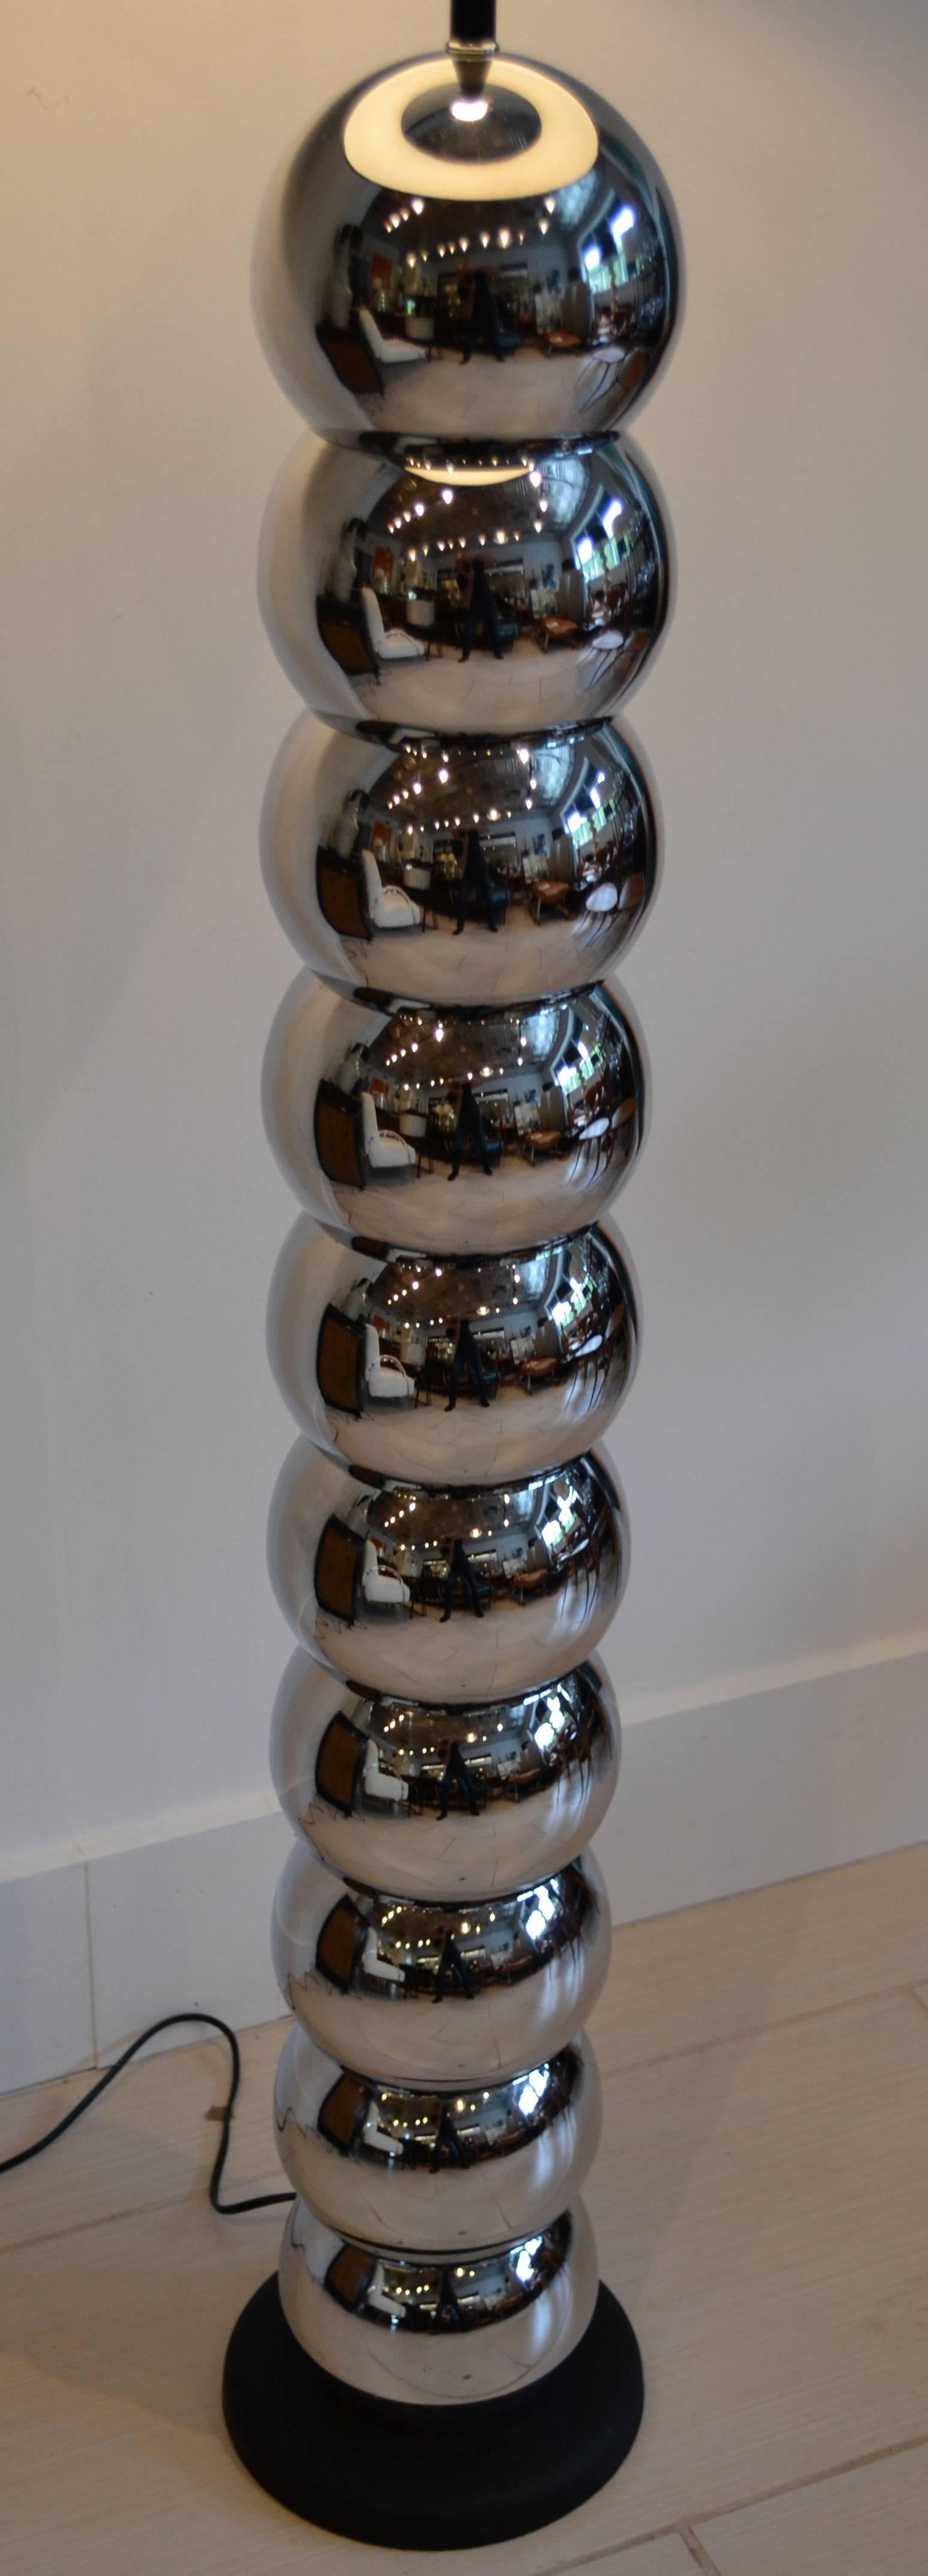 Rare polished chrome stacked ball floor lamp by George Kovacs. In excellent condition. Professionally rewired and ready to go!